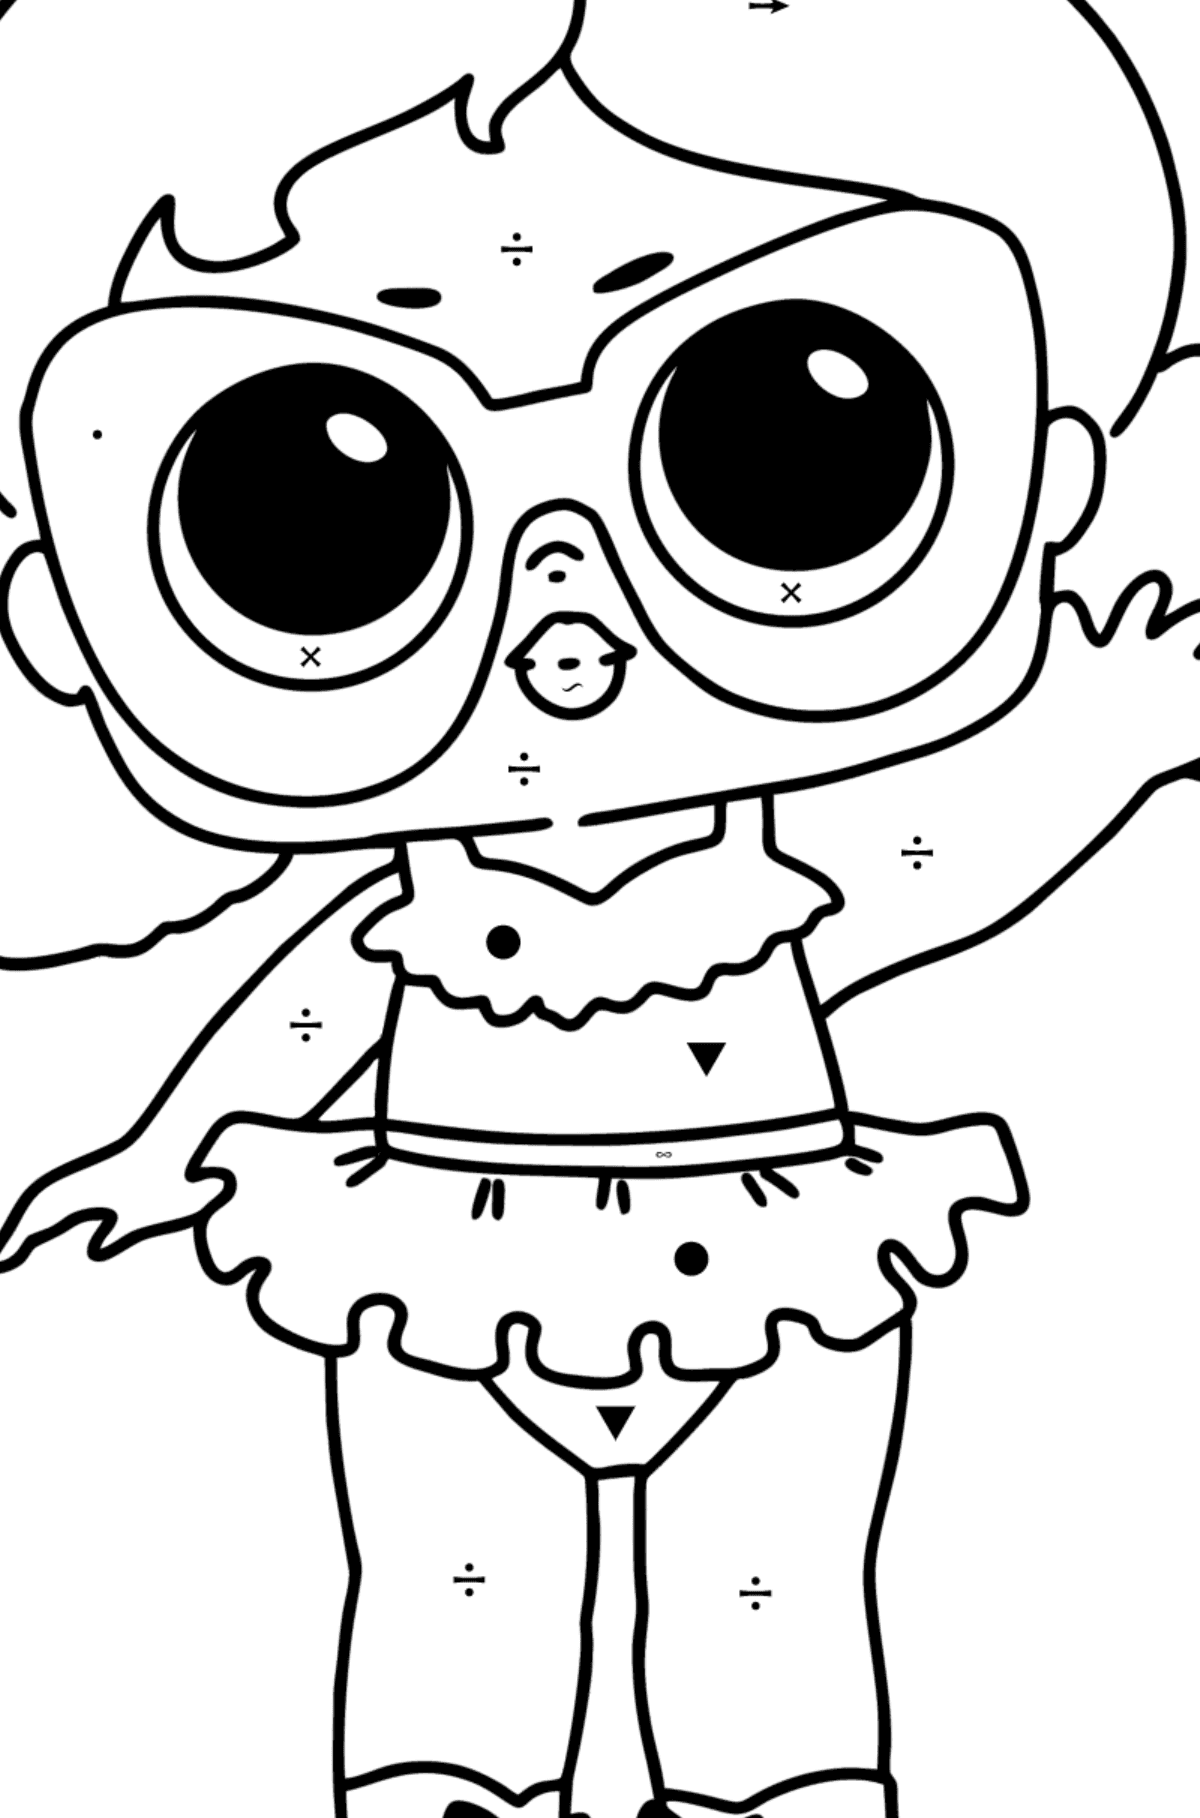 LOL Surprise Vacay babay coloring page - Coloring by Symbols for Kids